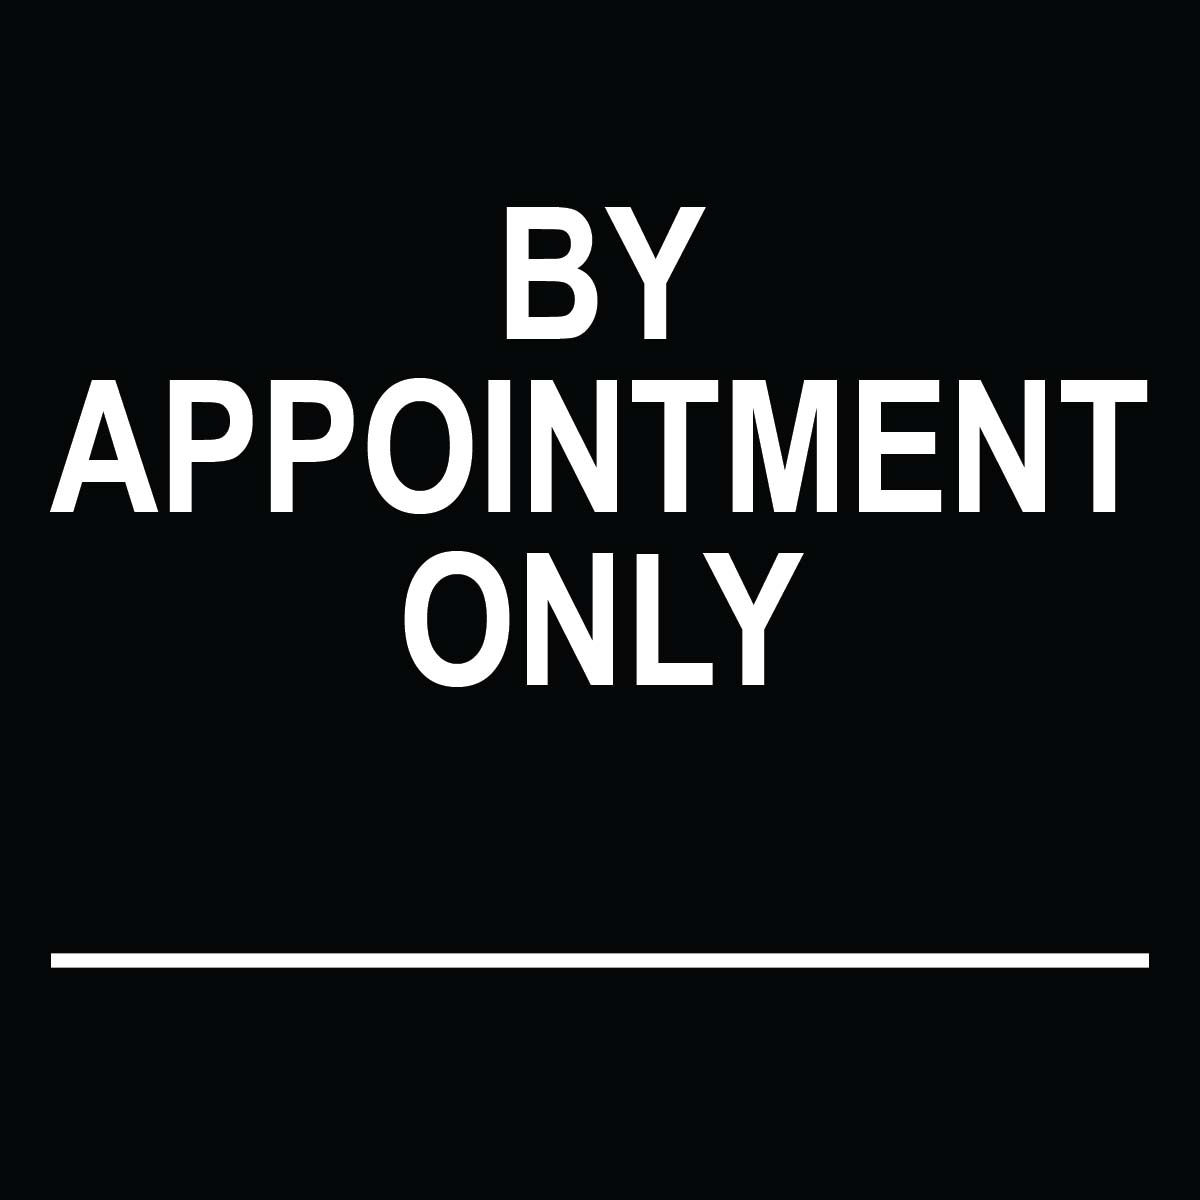 By Appointment Only Sign - 8" x 8"